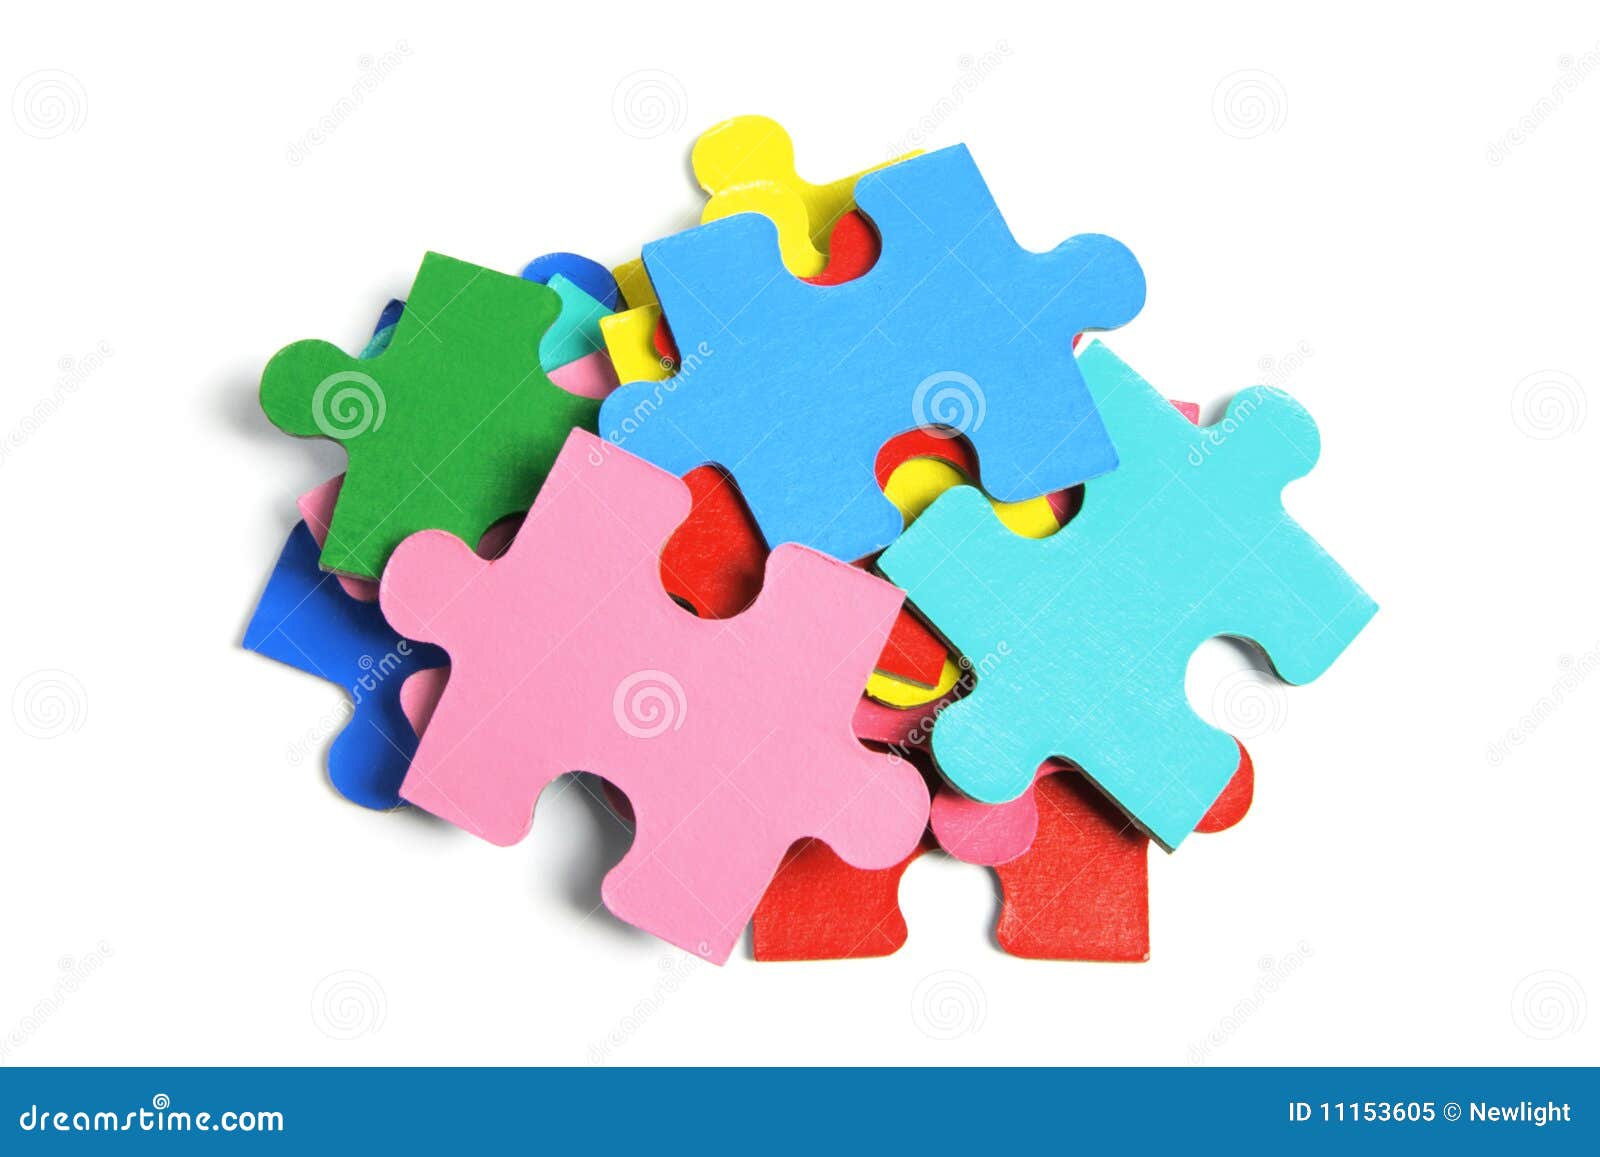 pile of jigsaw puzzle pieces